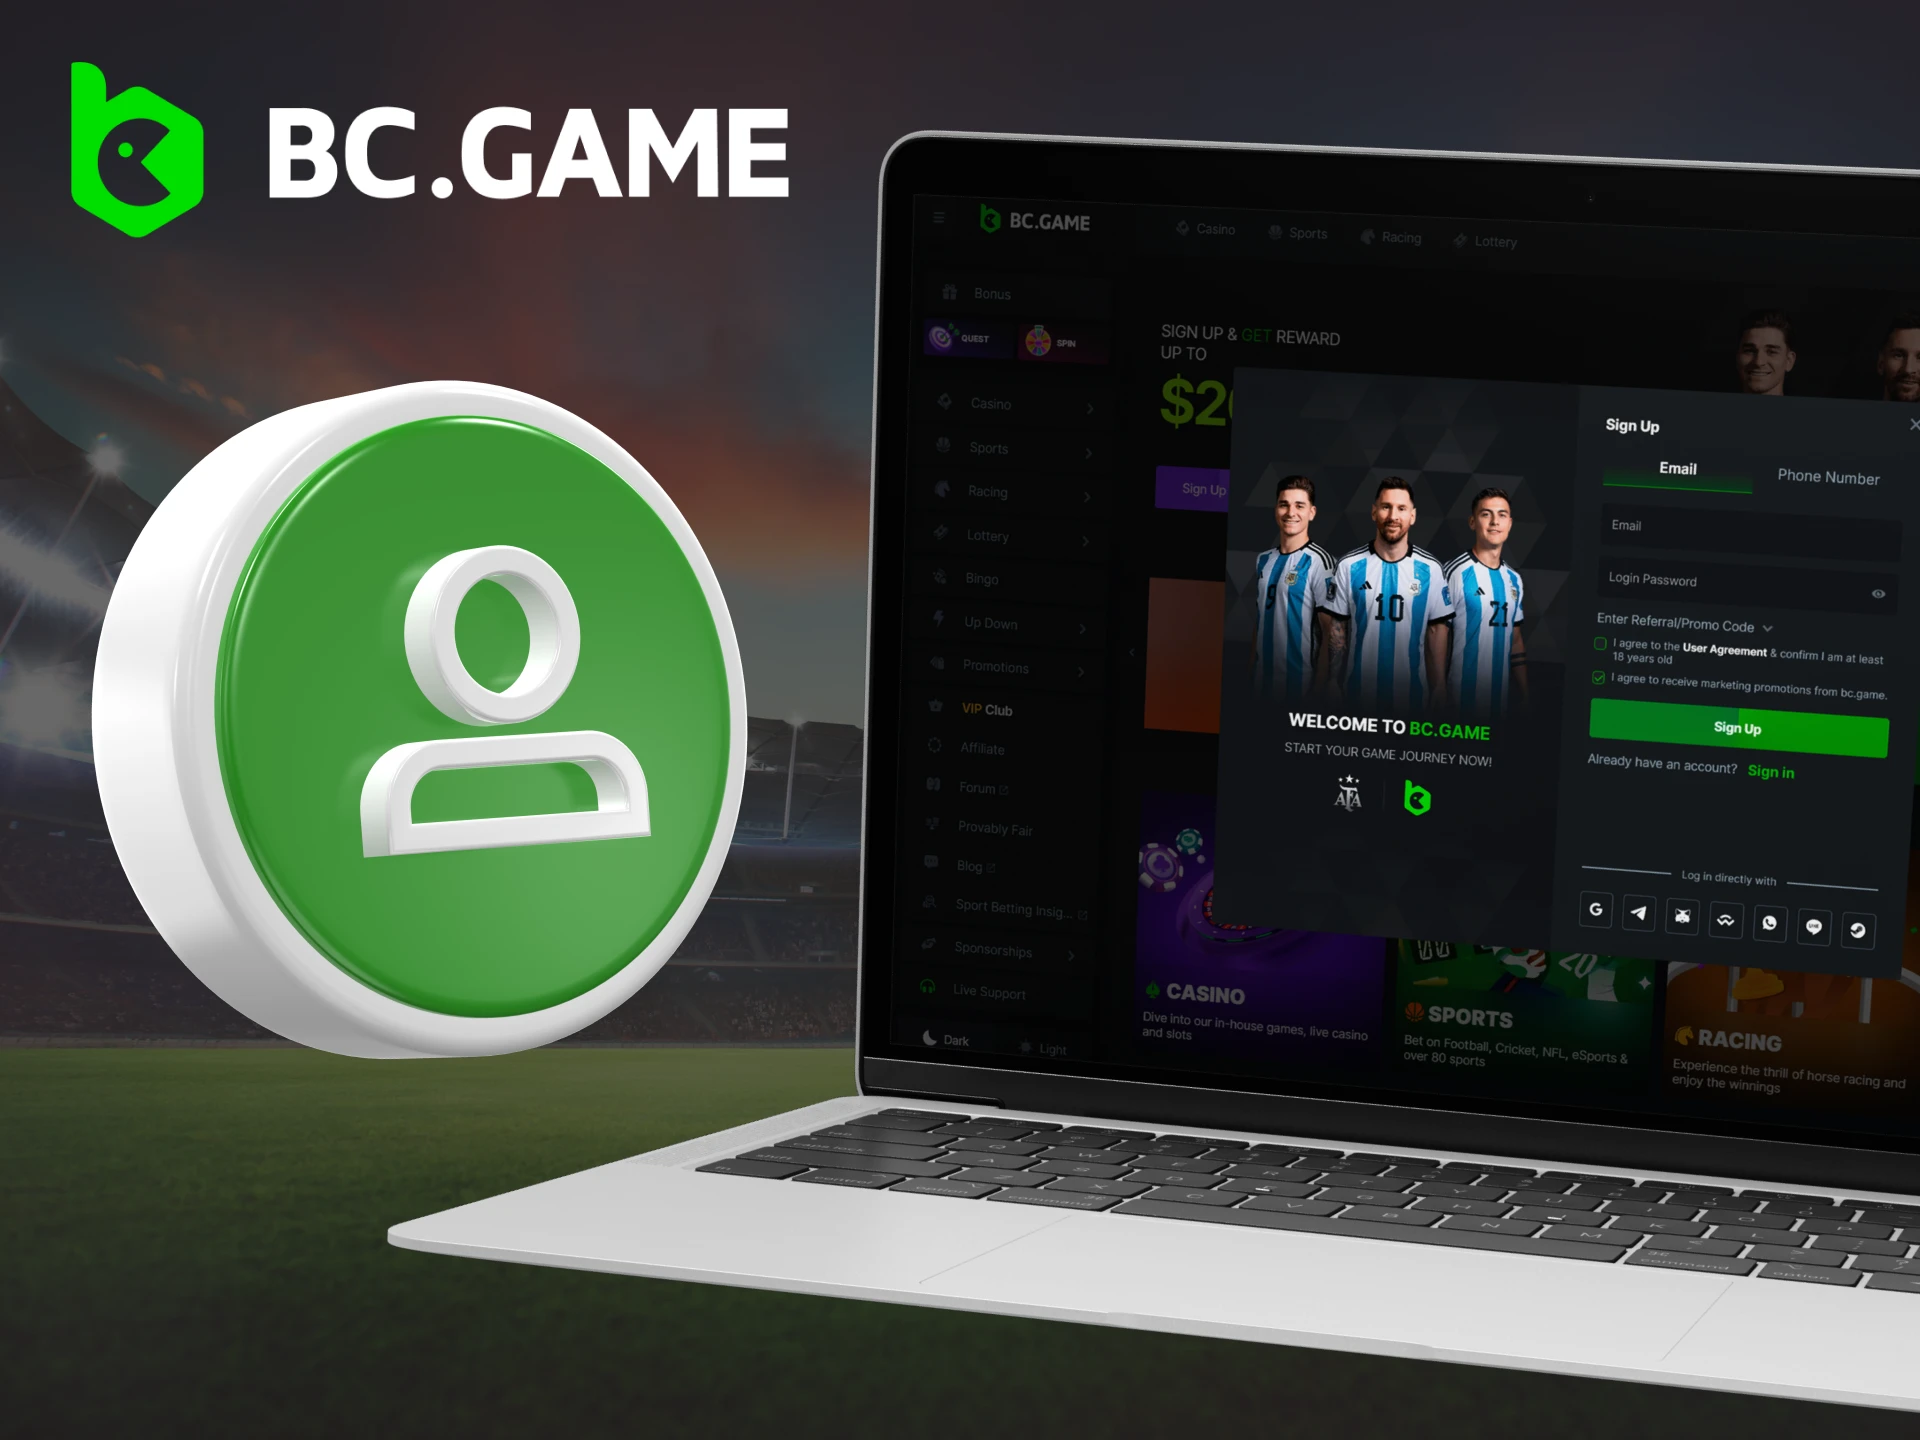 To start playing casino games and betting on sports with BC Game, register.